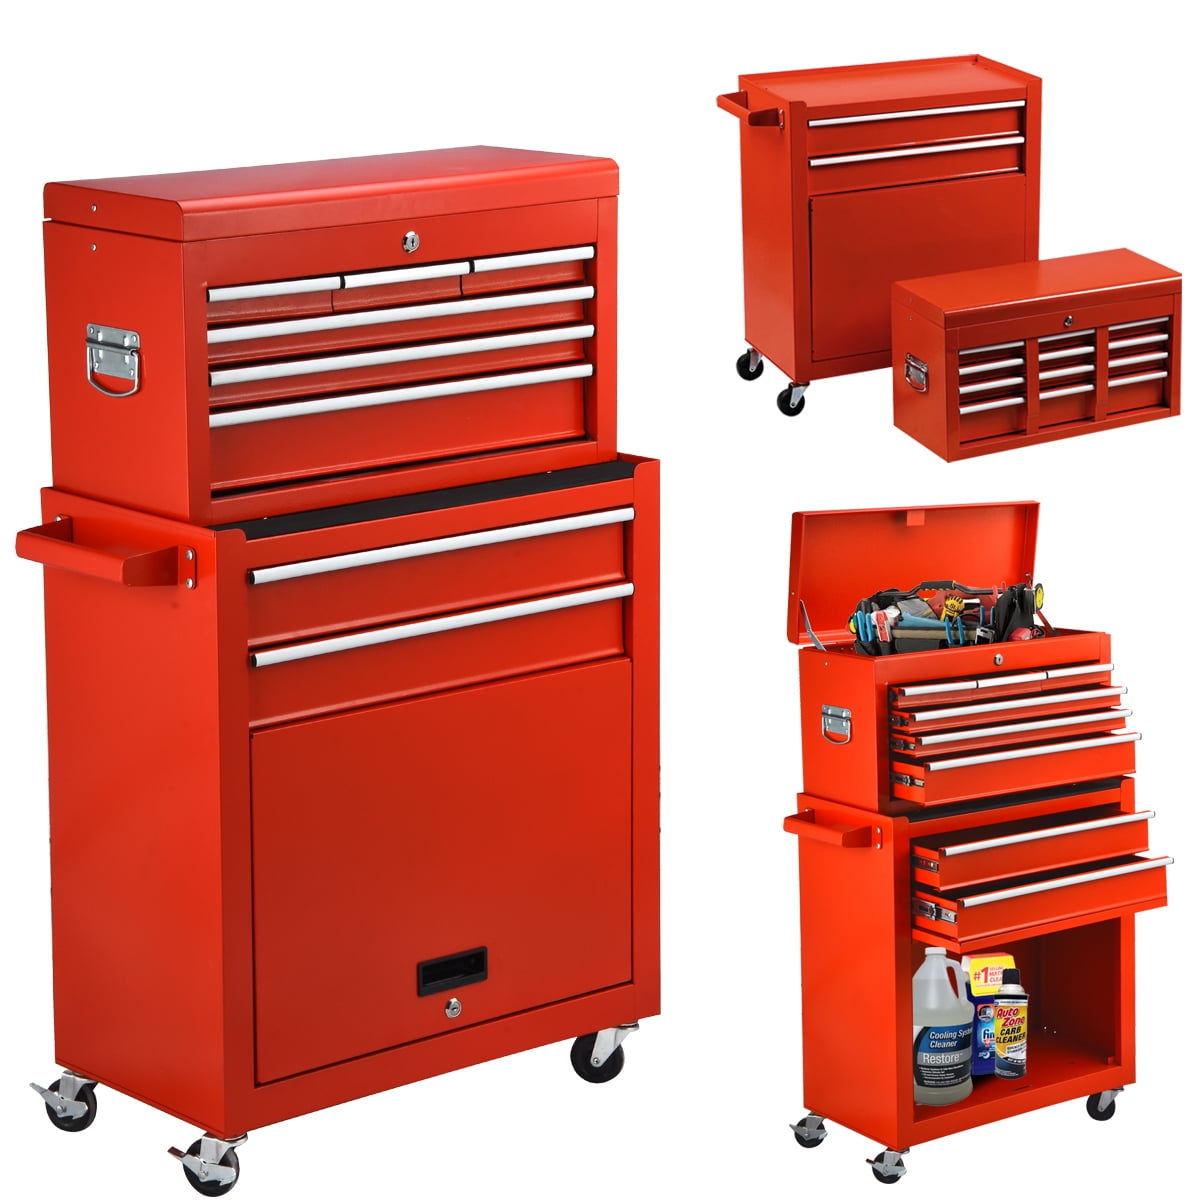 Ultra HD 2 Drawer Rolling Cabinet Steel Locking Storage Toolbox Seville Classics for sale online 